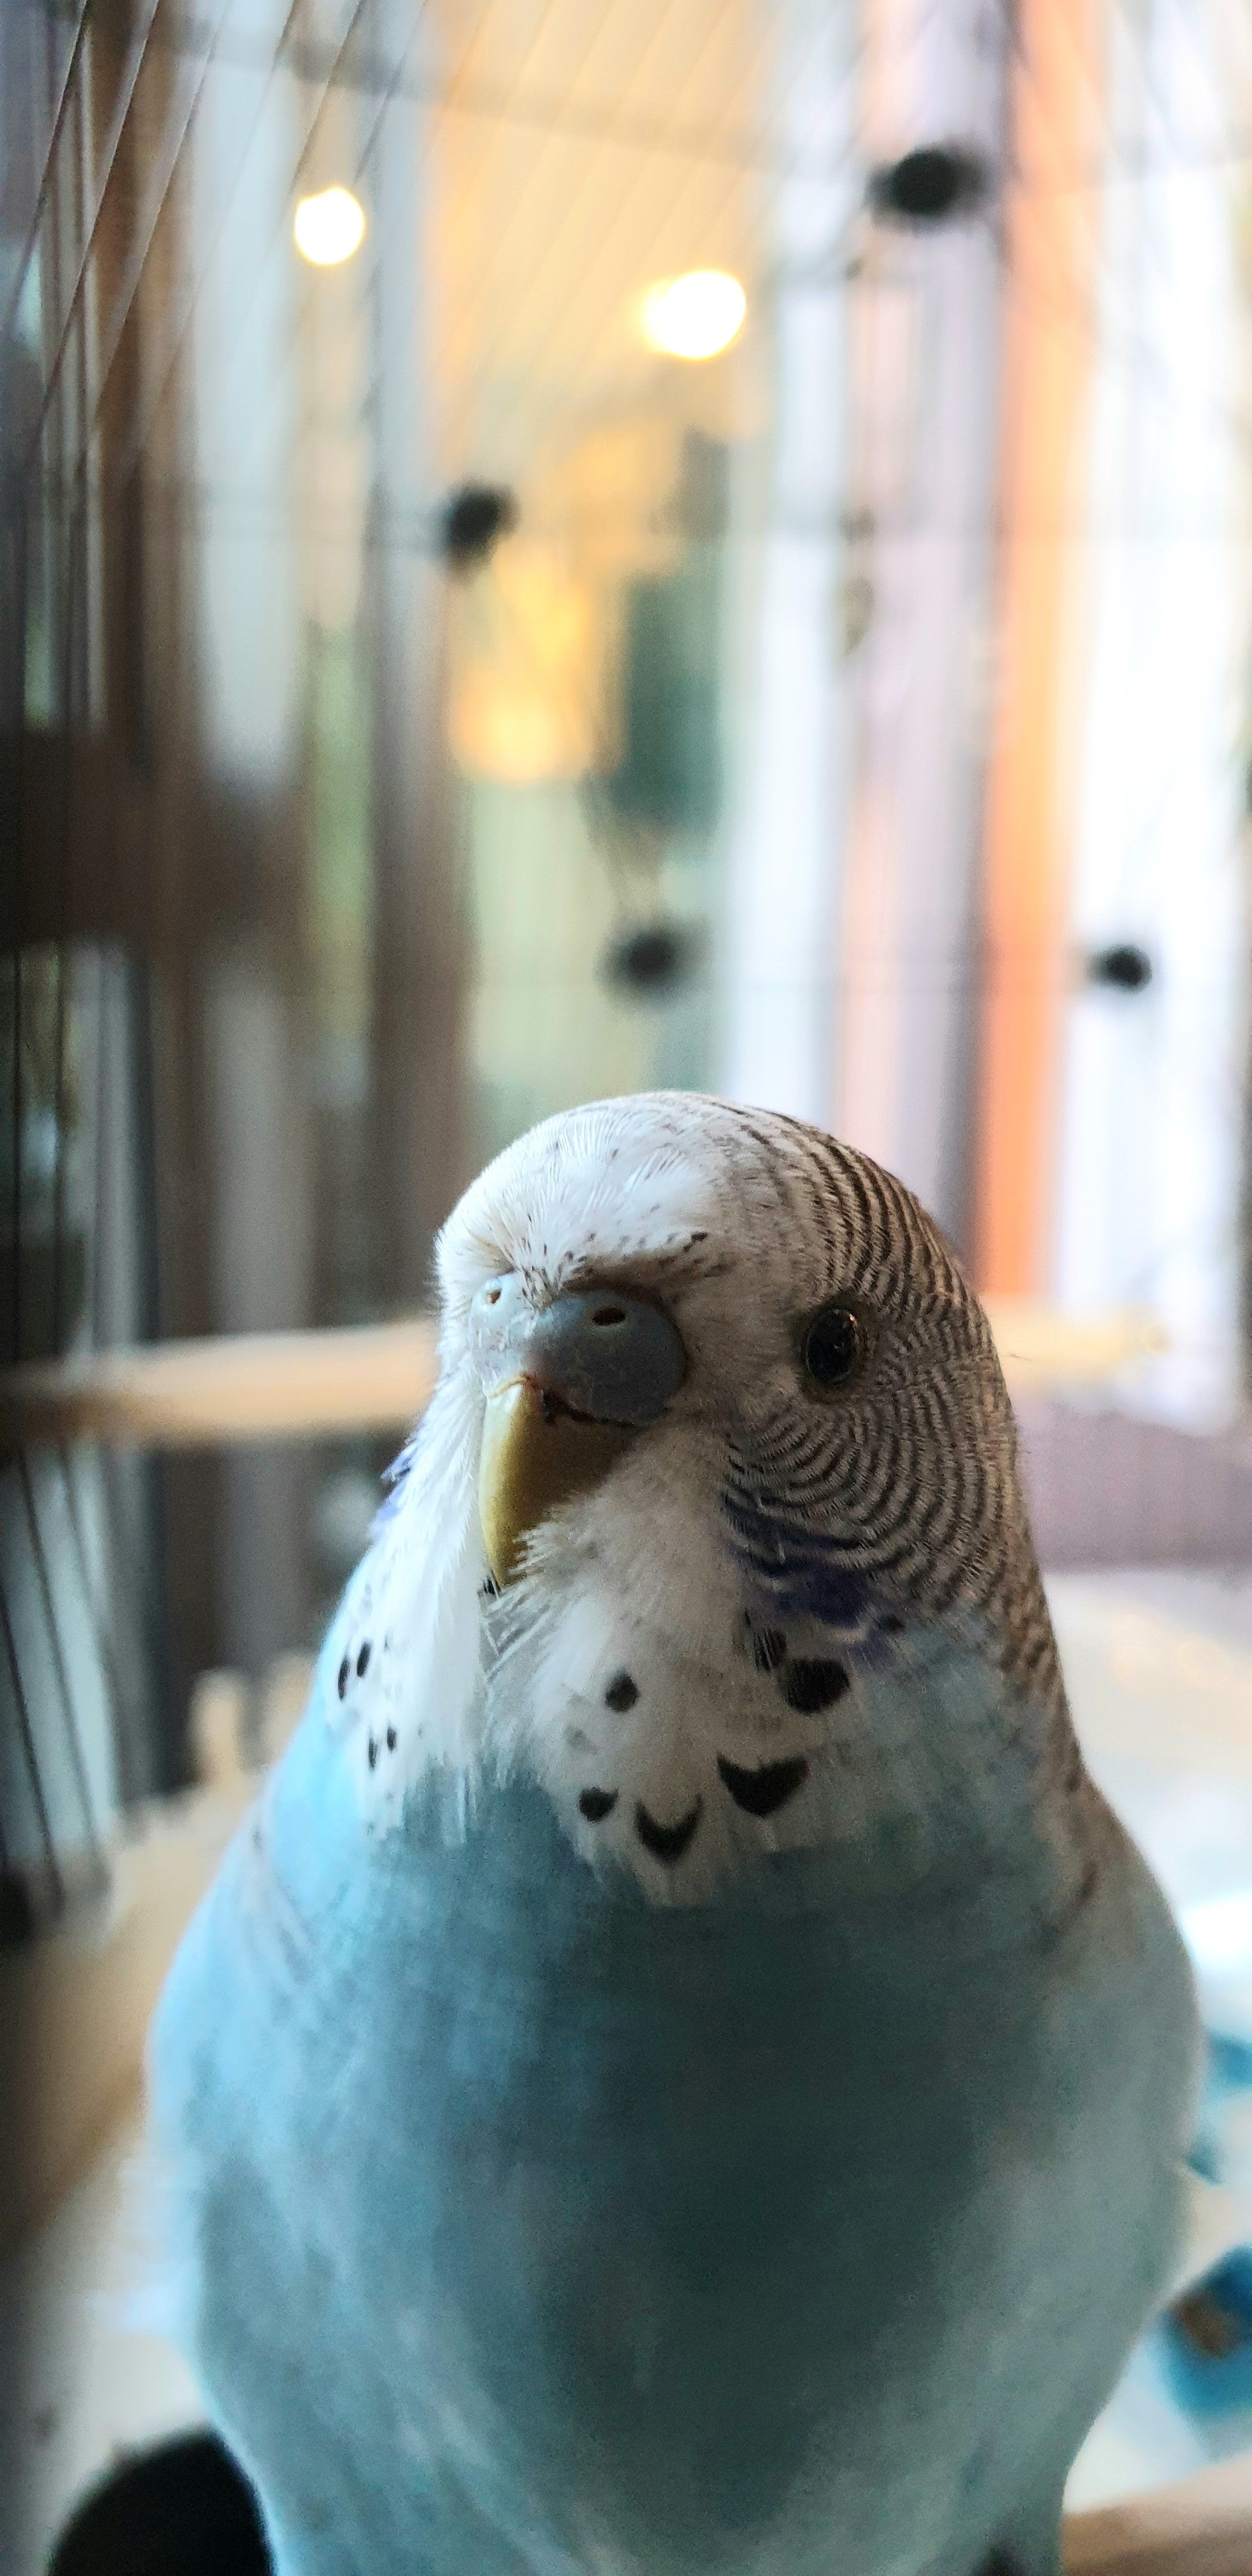 budgie sounds are a source of great pleasure